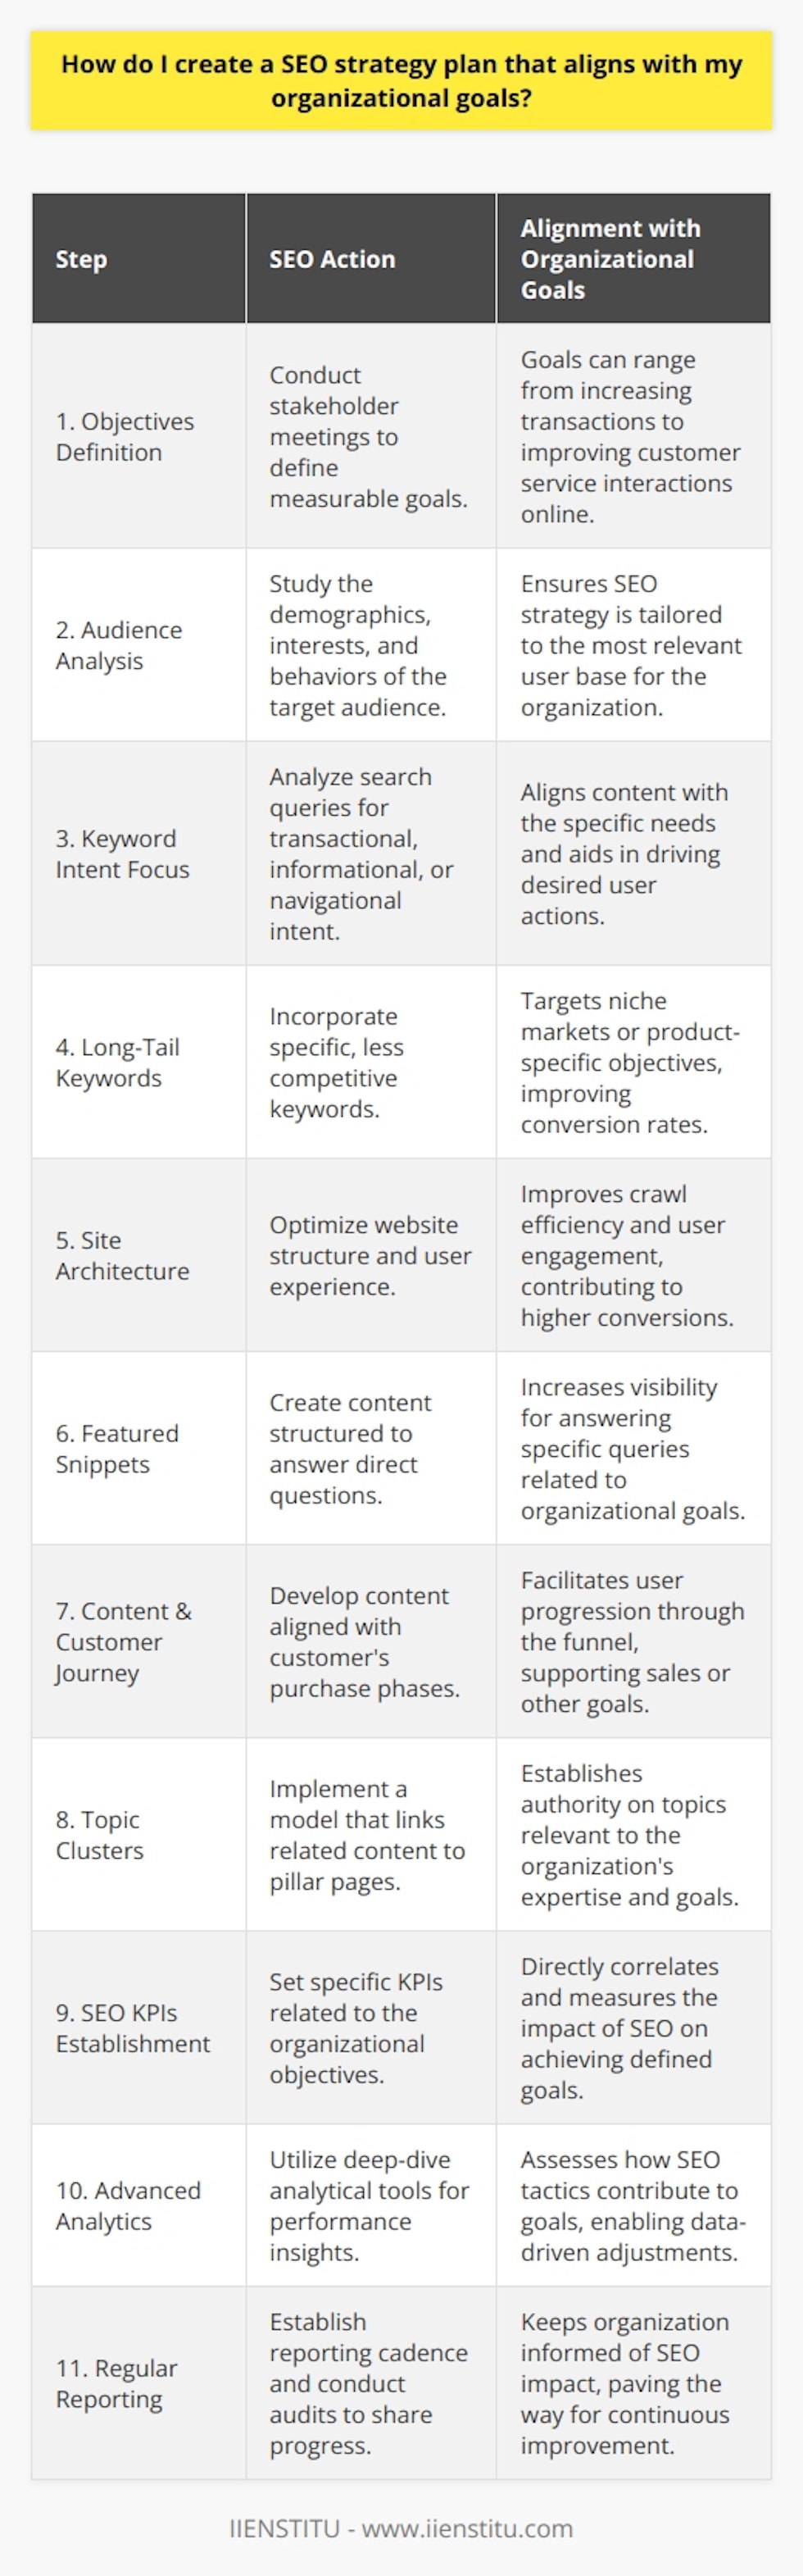 Creating a comprehensive SEO strategy plan that dovetails with an organization's goals requires both an understanding of what the organization aims to achieve and an ability to translate that into actionable SEO tactics. Here’s how to approach this task:**Understanding Organizational Goals:****1. Define Clear Objectives:**Begin by conducting meetings with key stakeholders within the organization to define clear, measurable goals. These may vary from increasing online transactions, boosting the number of leads generated, expanding digital presence in international markets, or improving online customer service interactions.**2. Analyze the Target Audience:**Understanding the demographic, interests, and online behavior of your target audience is critical to tailoring your SEO strategy to the users that matter most to your organization.**Keyword Research and Selection:****3. Focus on Intent:**Go beyond traditional keyword research; analyze search queries for user intent. Determine whether potential keywords are transactional, informational, or navigational. This alignment with user intent will ensure that the content you create meets the user's needs and drives the desired actions.**4. Leverage Long-Tail Keywords:**Long-tail keywords are less competitive and more specific, which often leads to higher conversion rates. They can play a pivotal role in aligning the SEO strategy with specific organizational goals, such as addressing niche markets or product-specific objectives.**On-Page Optimization:****5. Improve Site Architecture and User Experience:**Ensure that the website is structured logically with a clear hierarchy. This not only helps search engines crawl your site more effectively but also enhances user experience, which can lead to higher engagement and conversions.**6. Optimize for Featured Snippets:**Structuring content to answer questions directly can improve the chances of appearing in featured snippets, which increases visibility and can drive traffic aligned with specific aspects of your organizational goals.**Content Creation and Marketing:****7. Align Content With Customer Journey:**Develop content for different stages of the customer journey, ensuring that each piece of content furthers the goal of moving users to the next stage - from awareness to consideration to decision.**8. Implement a Topic Cluster Model:**Use pillar pages as comprehensive guides to particular topics, linking out to more specific content pieces (cluster content). This not only helps search engines understand your site’s content but also establishes your authority and expertise in your field.**Measuring and Analyzing Performance:****9. Establish SEO KPIs:**Set up specific KPIs that correlate directly with the organizational goals. For instance, if the objective is brand awareness, track metrics like organic impressions and branded search volume. For sales, focus on organic conversion rates and specific keyword rankings that are known to drive transactions.**10. Use Advanced Analytics:**Employ advanced analytics tools to go beyond surface metrics. Dive into page-level analytics, attribution models, and segmented user data to understand how your SEO efforts are contributing to the overall goals.**11. Regular Reporting:**Set up a cadence for regular reporting and audits. This ensures that everyone in the organization is aware of the performance and impact of SEO activities, and allows for strategy tuning and reallocation of resources as needed.By systematically aligning each aspect of your SEO strategy with the organization's broader goals, you can effectively optimize your online presence to serve the overall mission. SEO is not a standalone activity but an integral component of a holistic digital marketing approach that supports the organization's ambitions and leads to tangible outcomes.